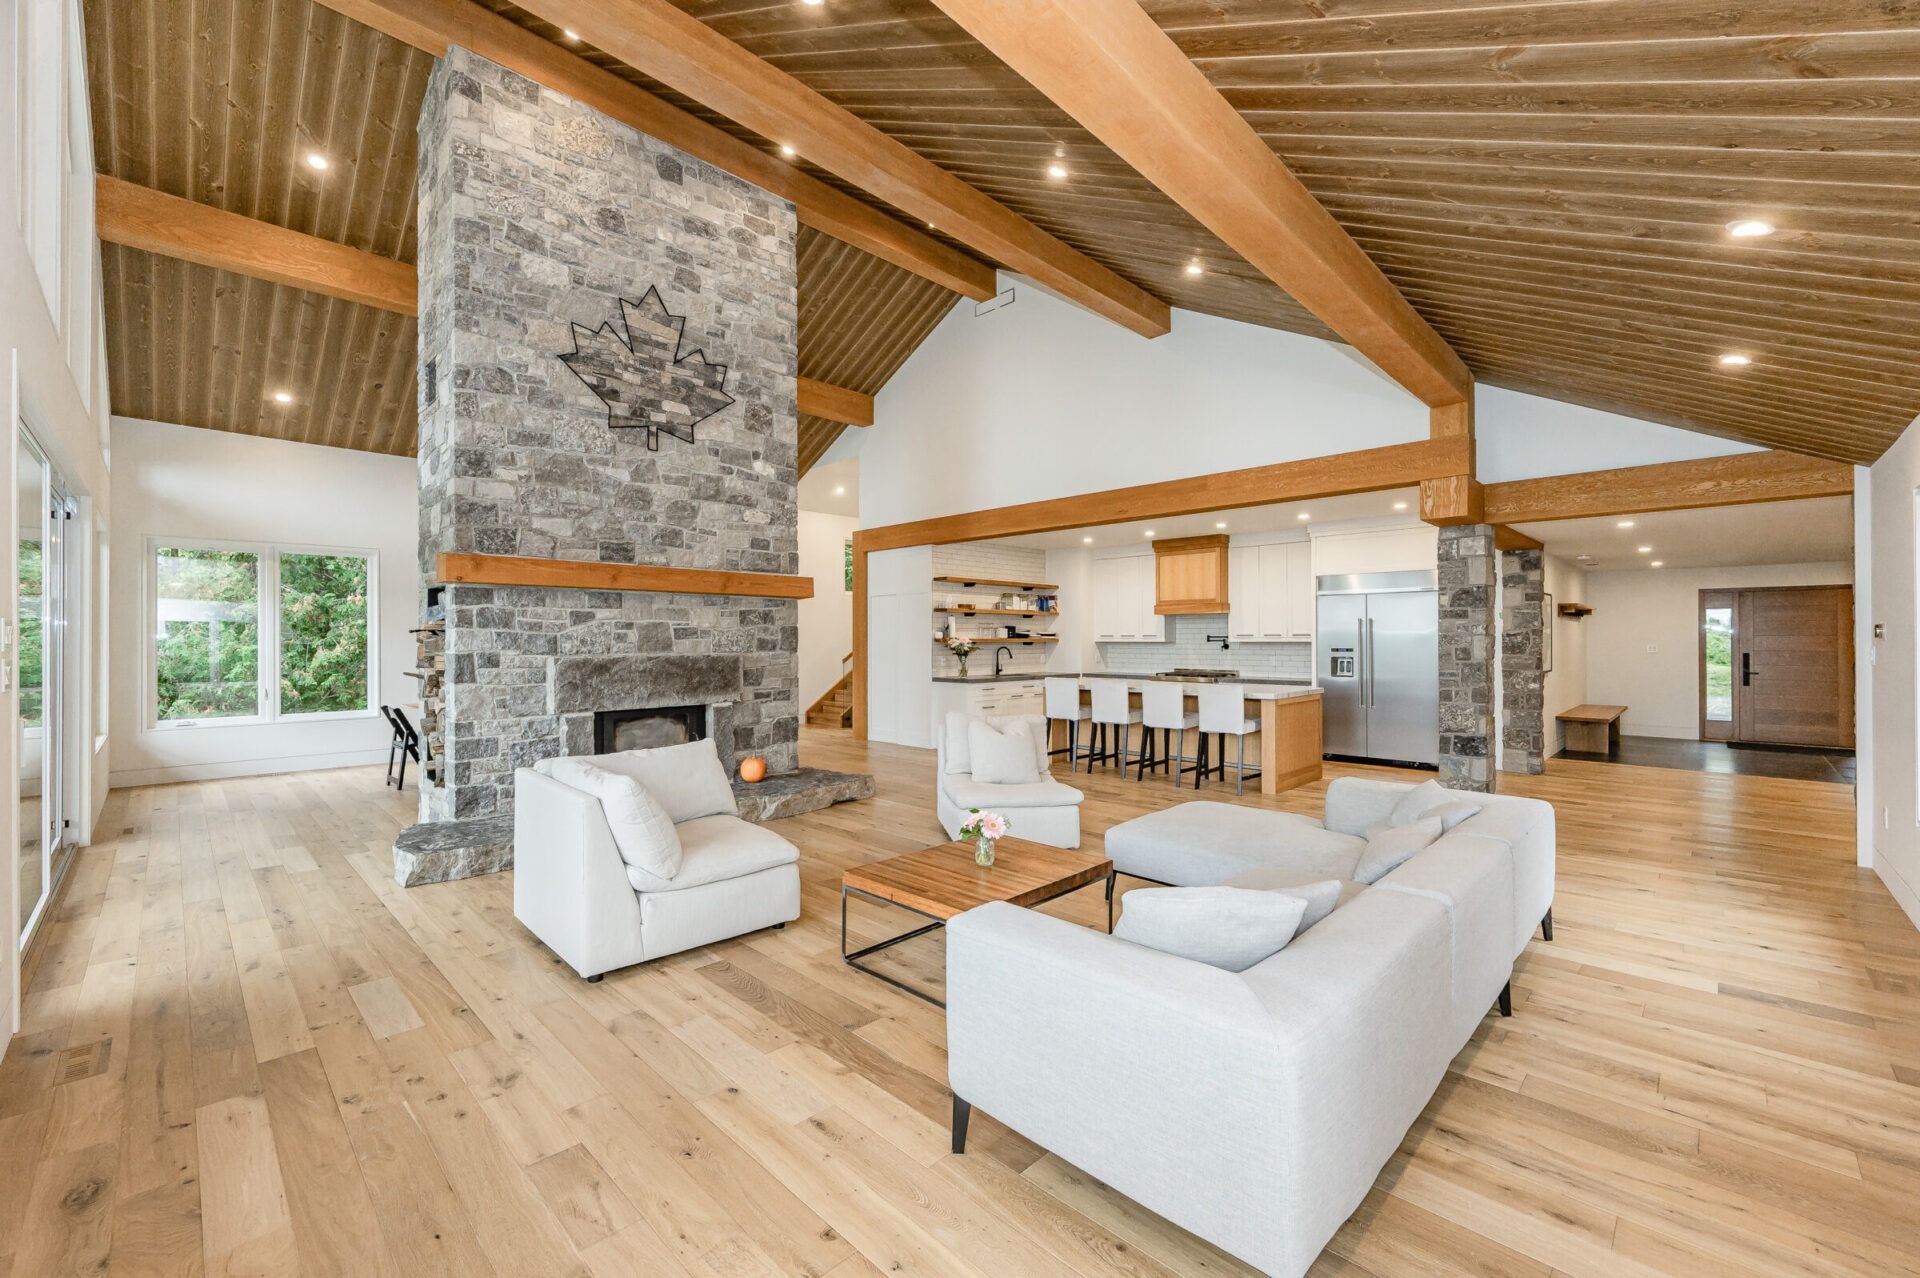 A spacious living room with a stone fireplace, exposed wooden beams, hardwood floors, white sofas, and an open-plan kitchen in the background.